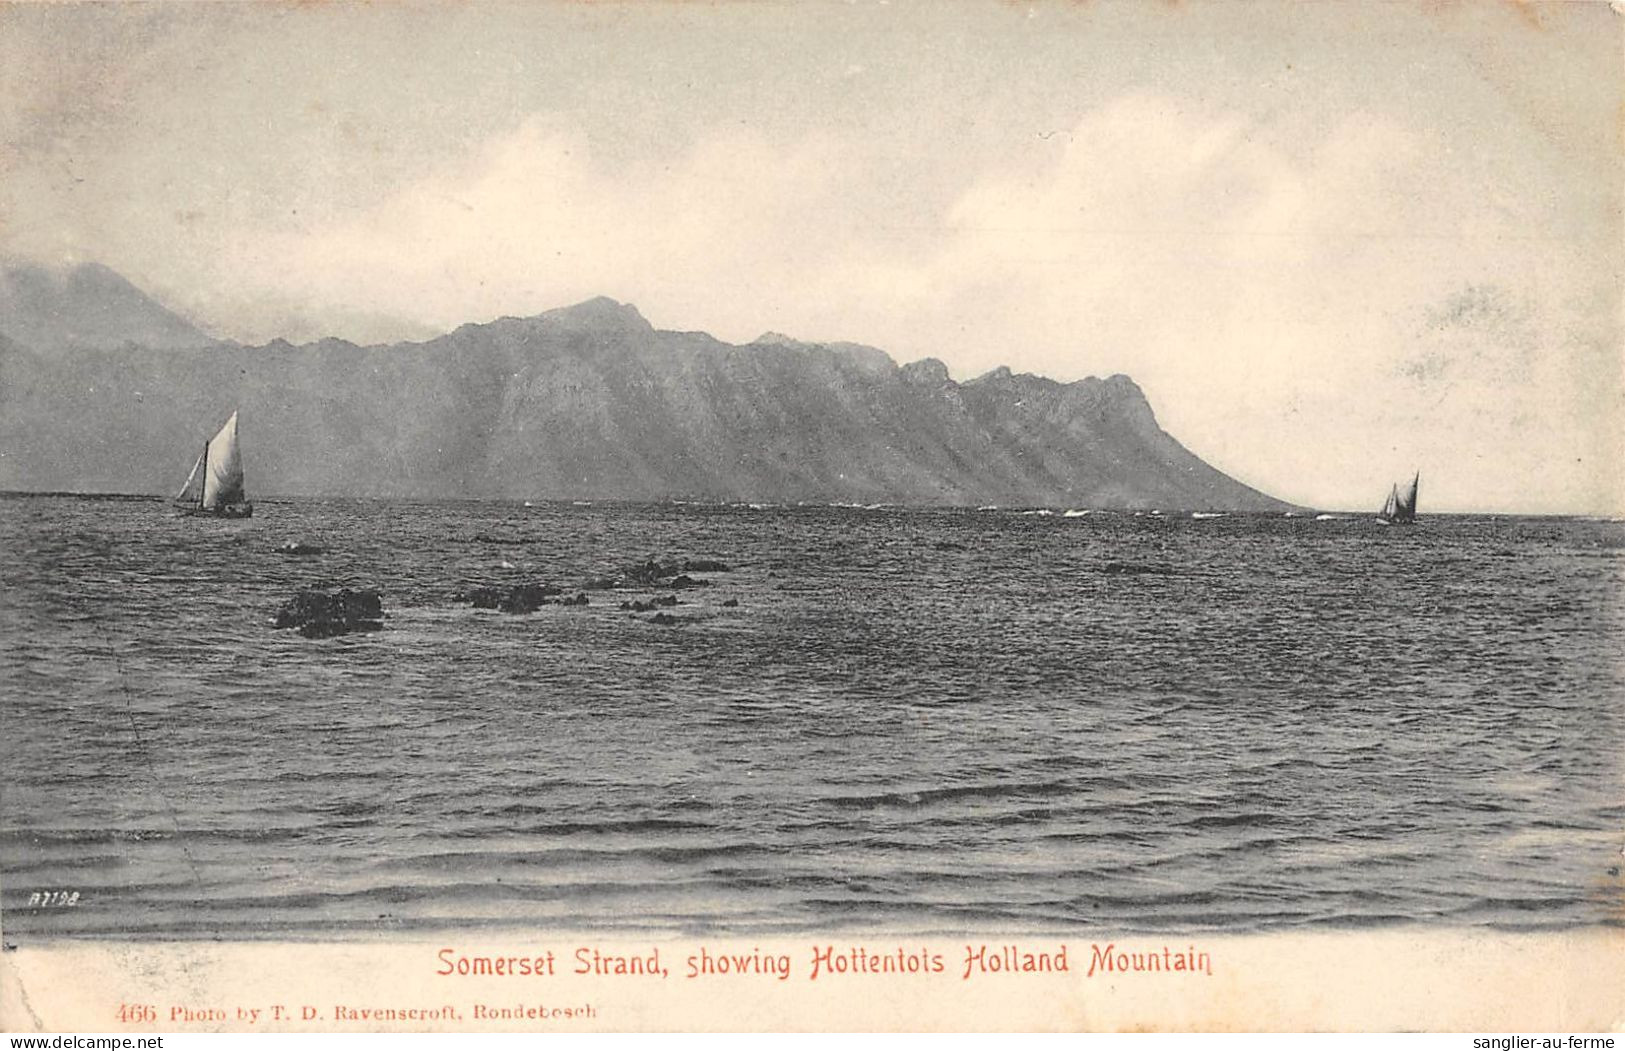 CPA / AFRIQUE DU SUD / SOMERSET STRAND / SHOWING HOTTENTOS / HOLLAND MOUNTAINS - Zuid-Afrika